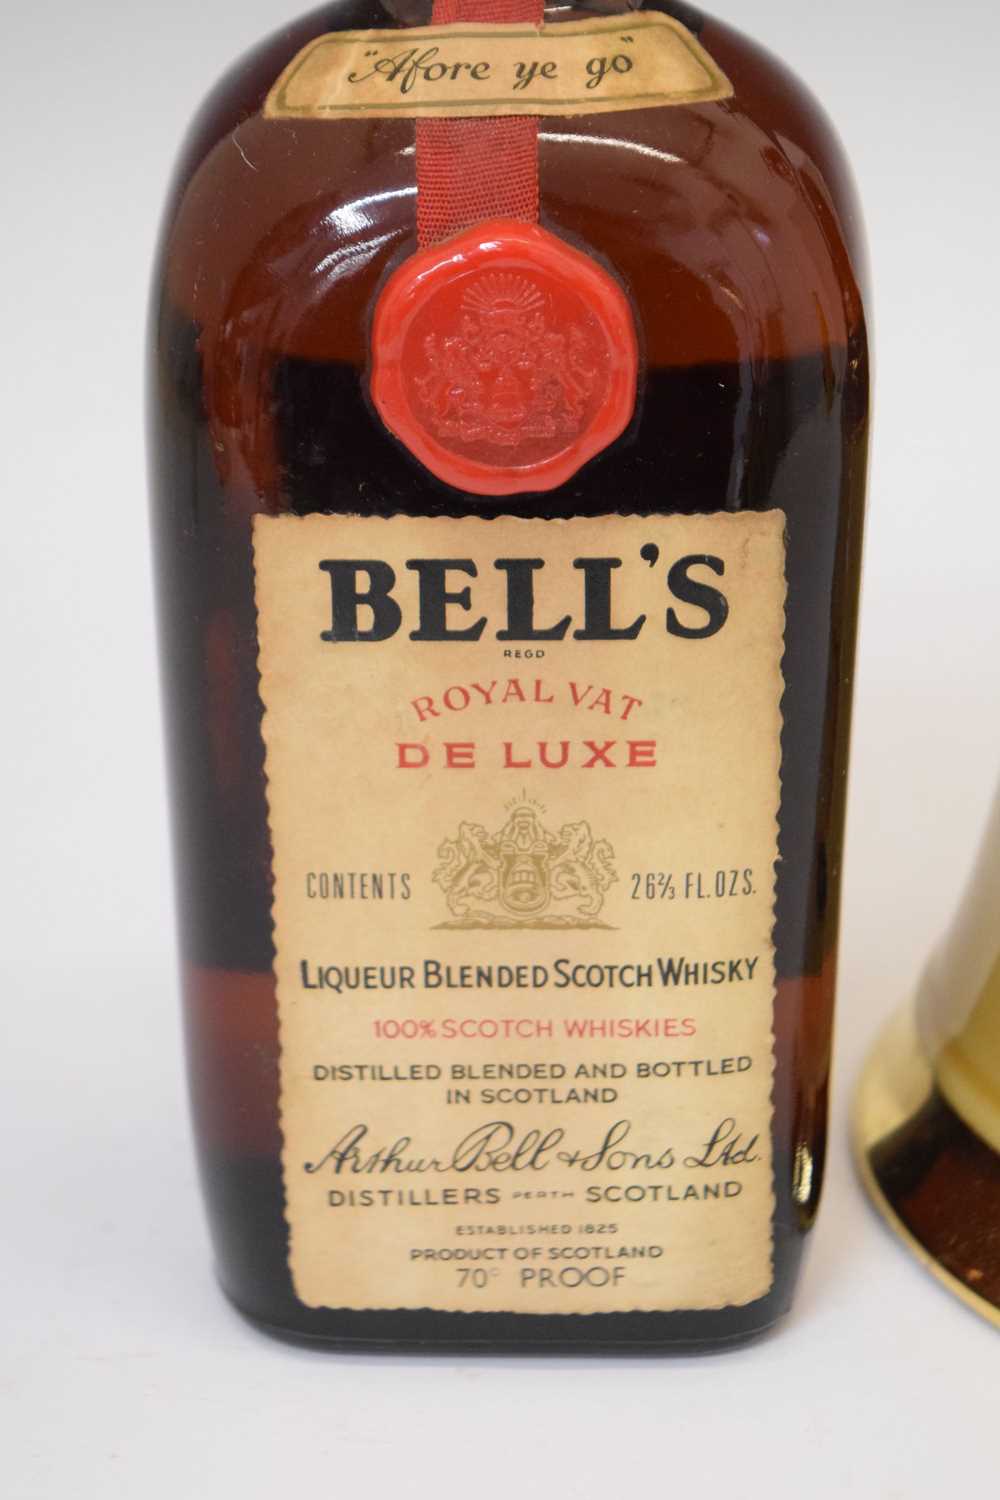 Bells Royal VAT De Luxe whisky, and Bells Whisky - Image 4 of 5